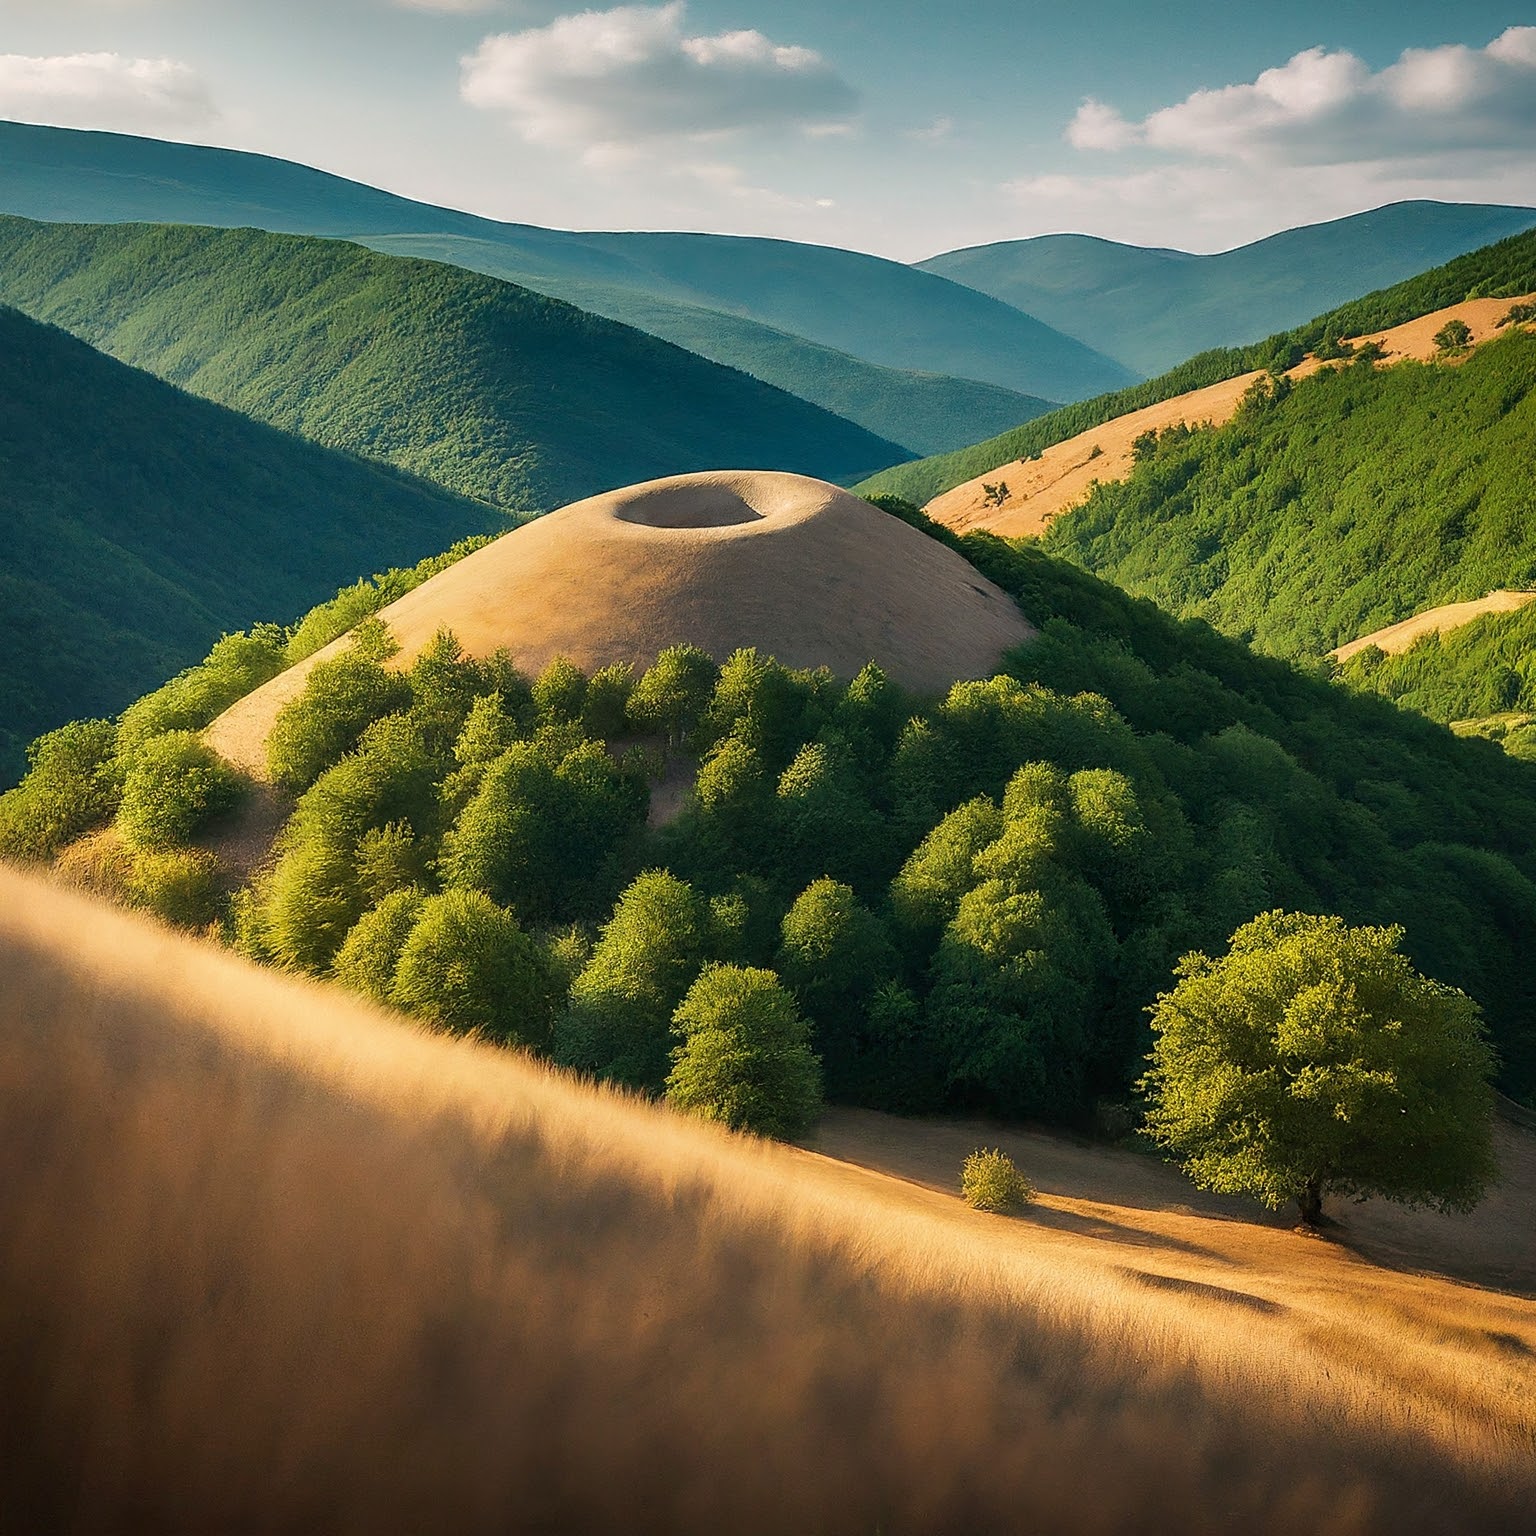 Valley of the Thracian Kings near Kazanlak, Bulgaria, with ancient tomb mounds.